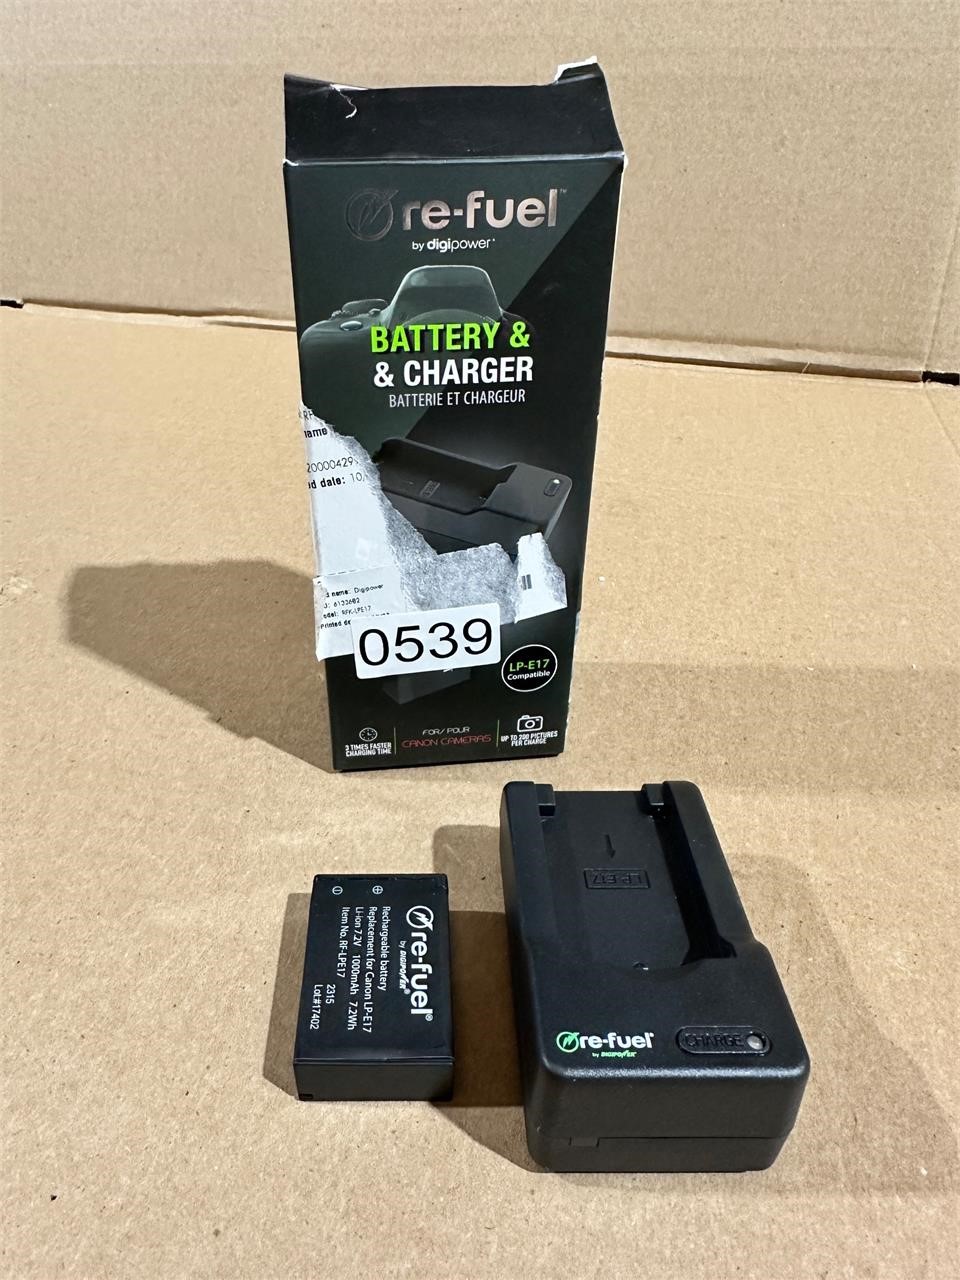 Re-fuel battery & charge for Canon lp-e17